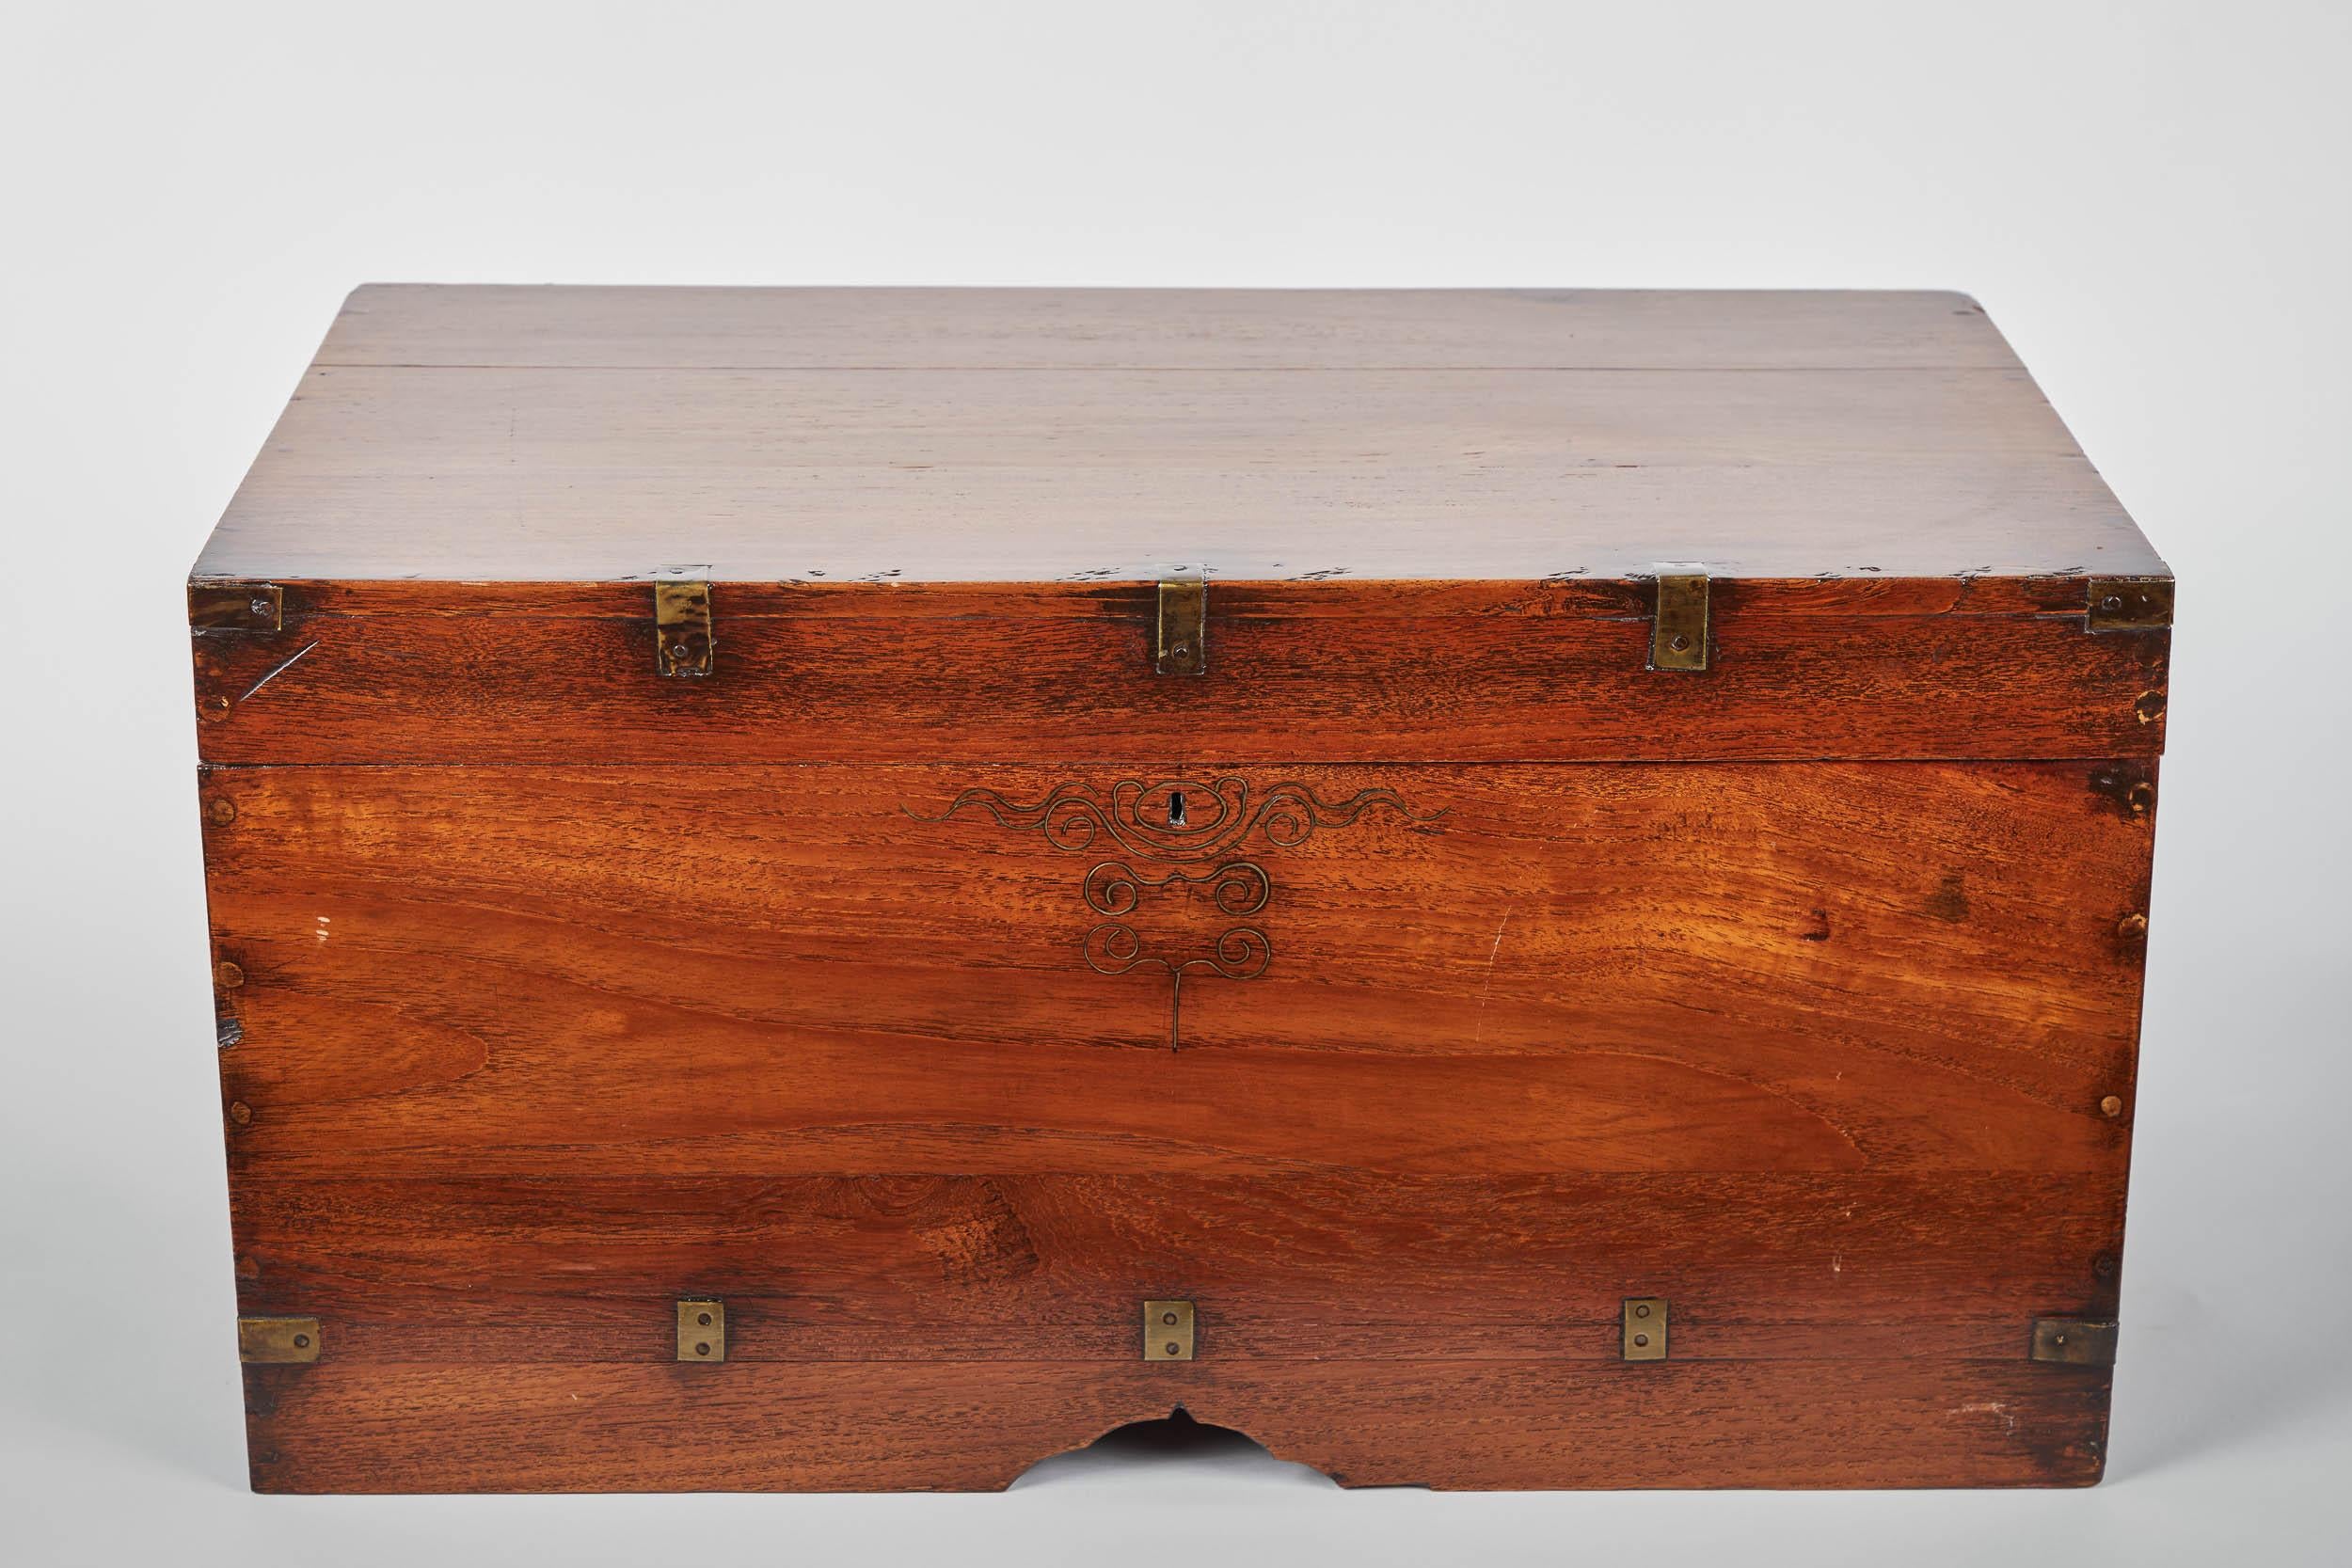 A lovely 19th century Burmese teak trunk in great condition. Gorgeous detailing inside and out, with two handles and inlay details.